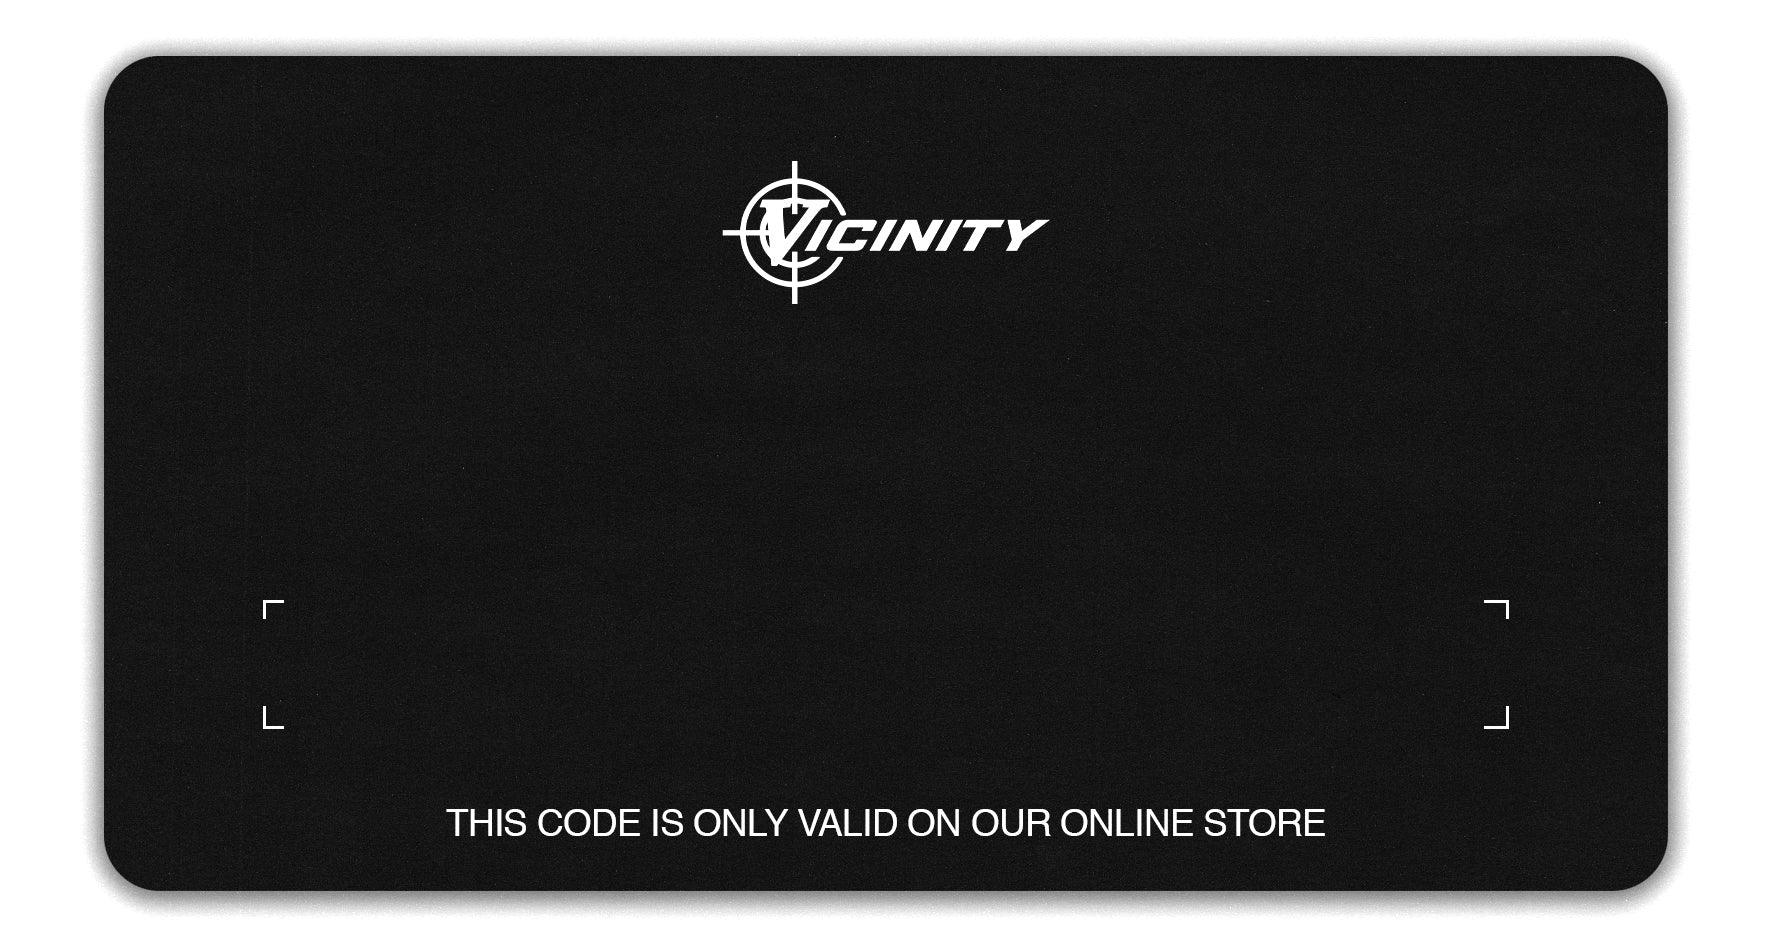 500€ GIFTCARD - VICINITY